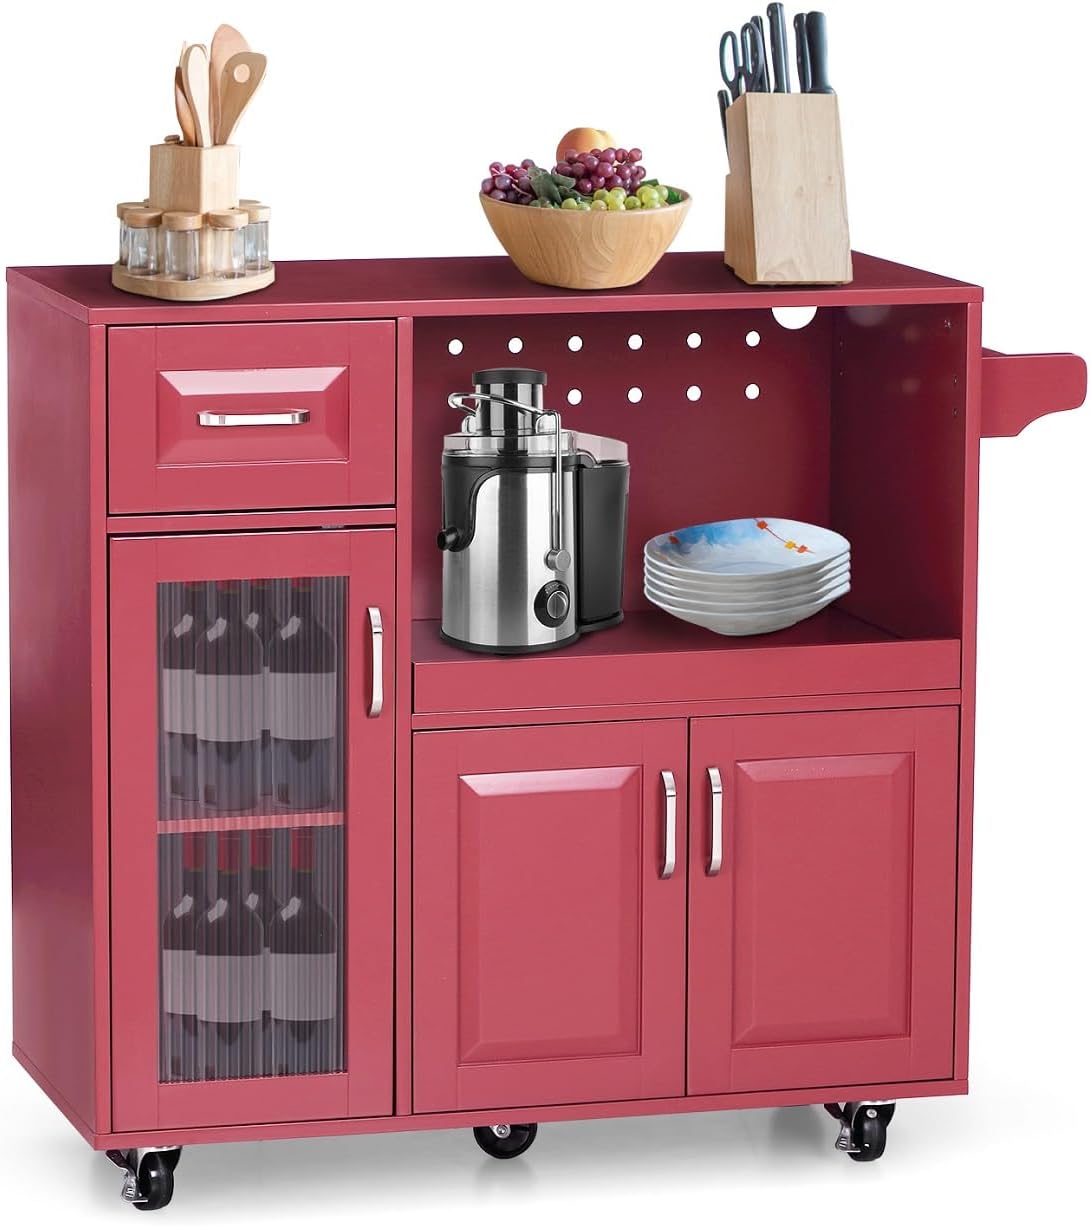 MFSTUDIO Rolling Kitchen Island on Wheels, Mobile Kitchen Cart Trolley Cart with Extendable Shelf, Drawers and Towel Rack, Portable Storage Island Cart for Dining Room, Burgundy